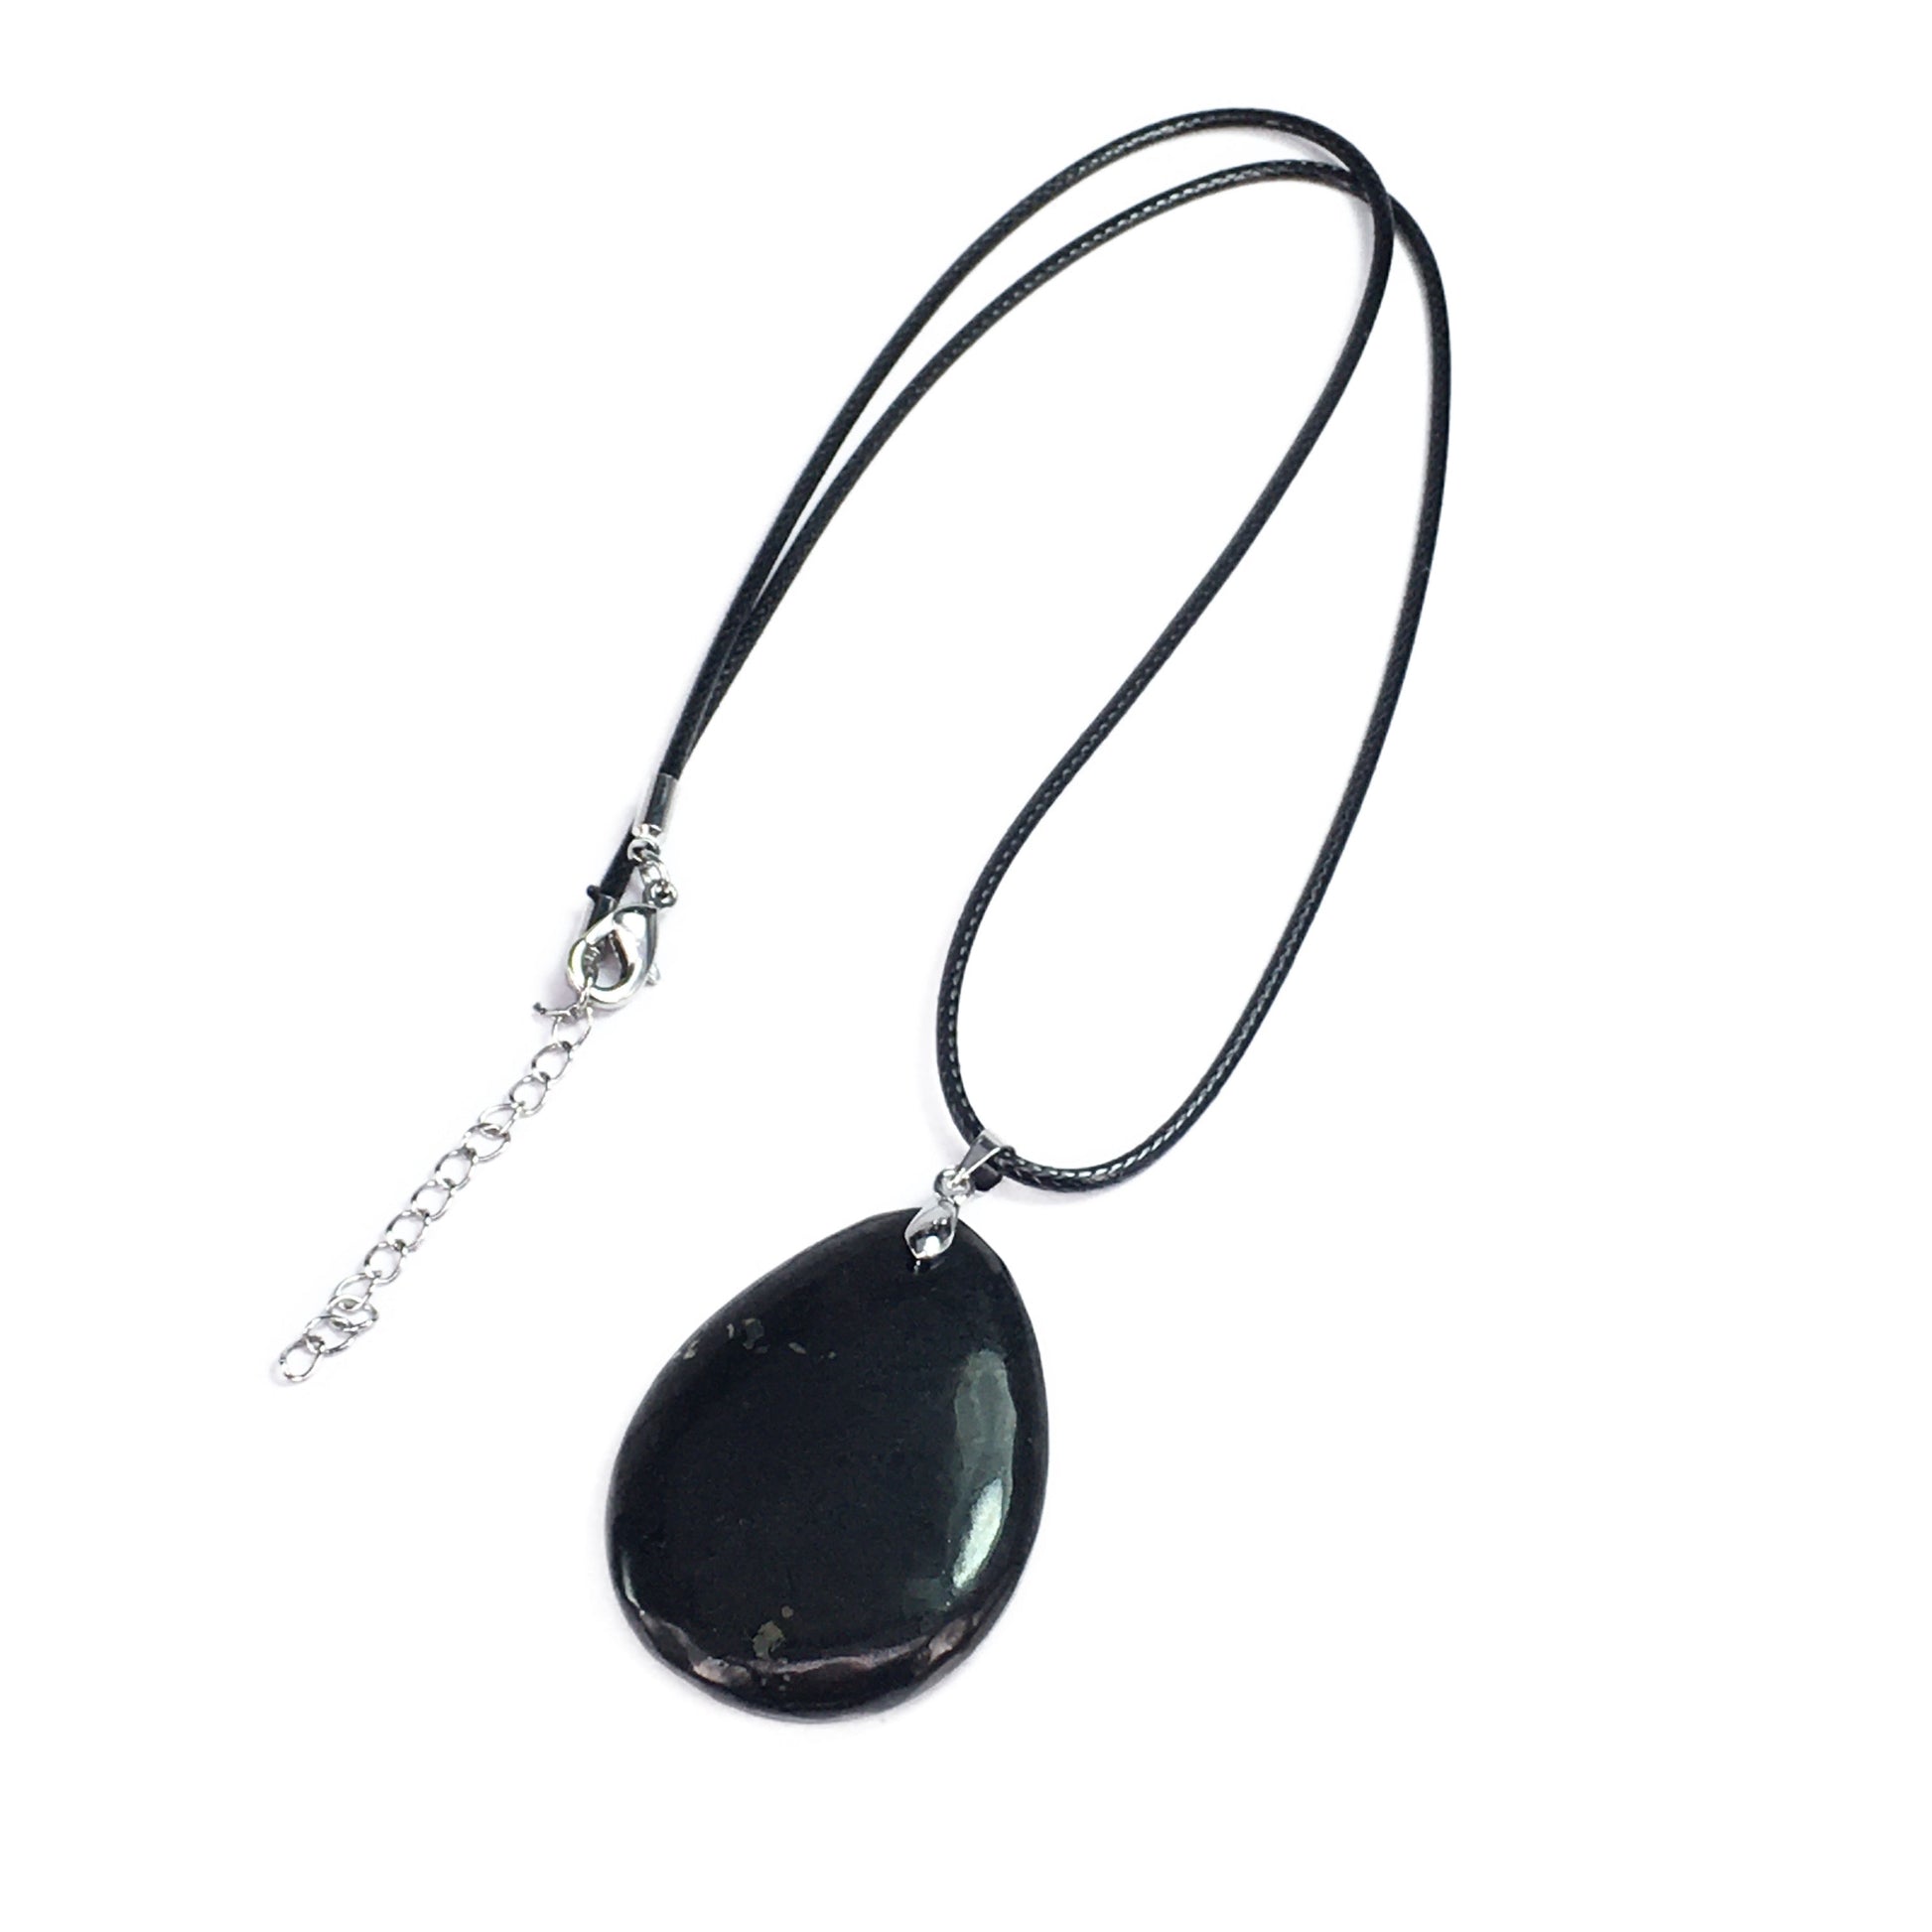 Shungite Pear Shape Pendant 30X40mm With Leather Cord Necklace